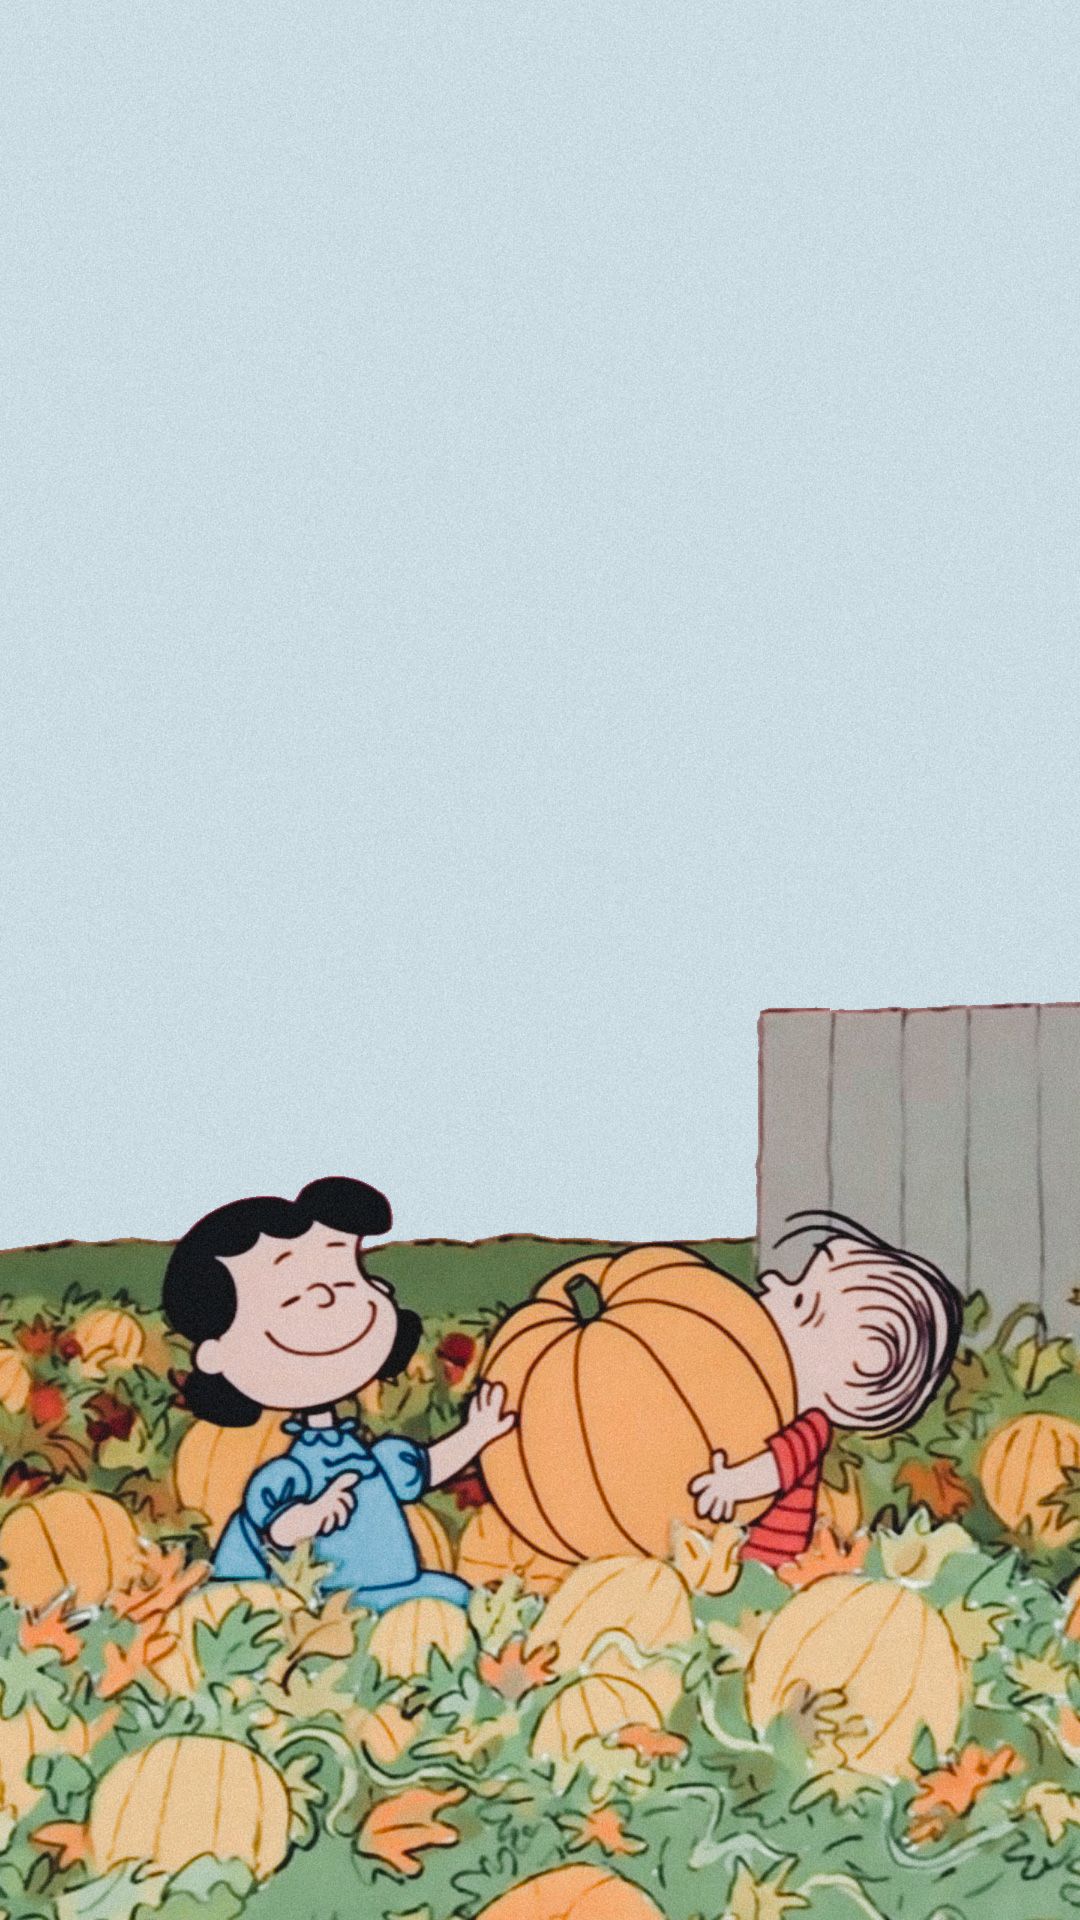 Charlie Brown and Lucy in the pumpkin patch - Charlie Brown